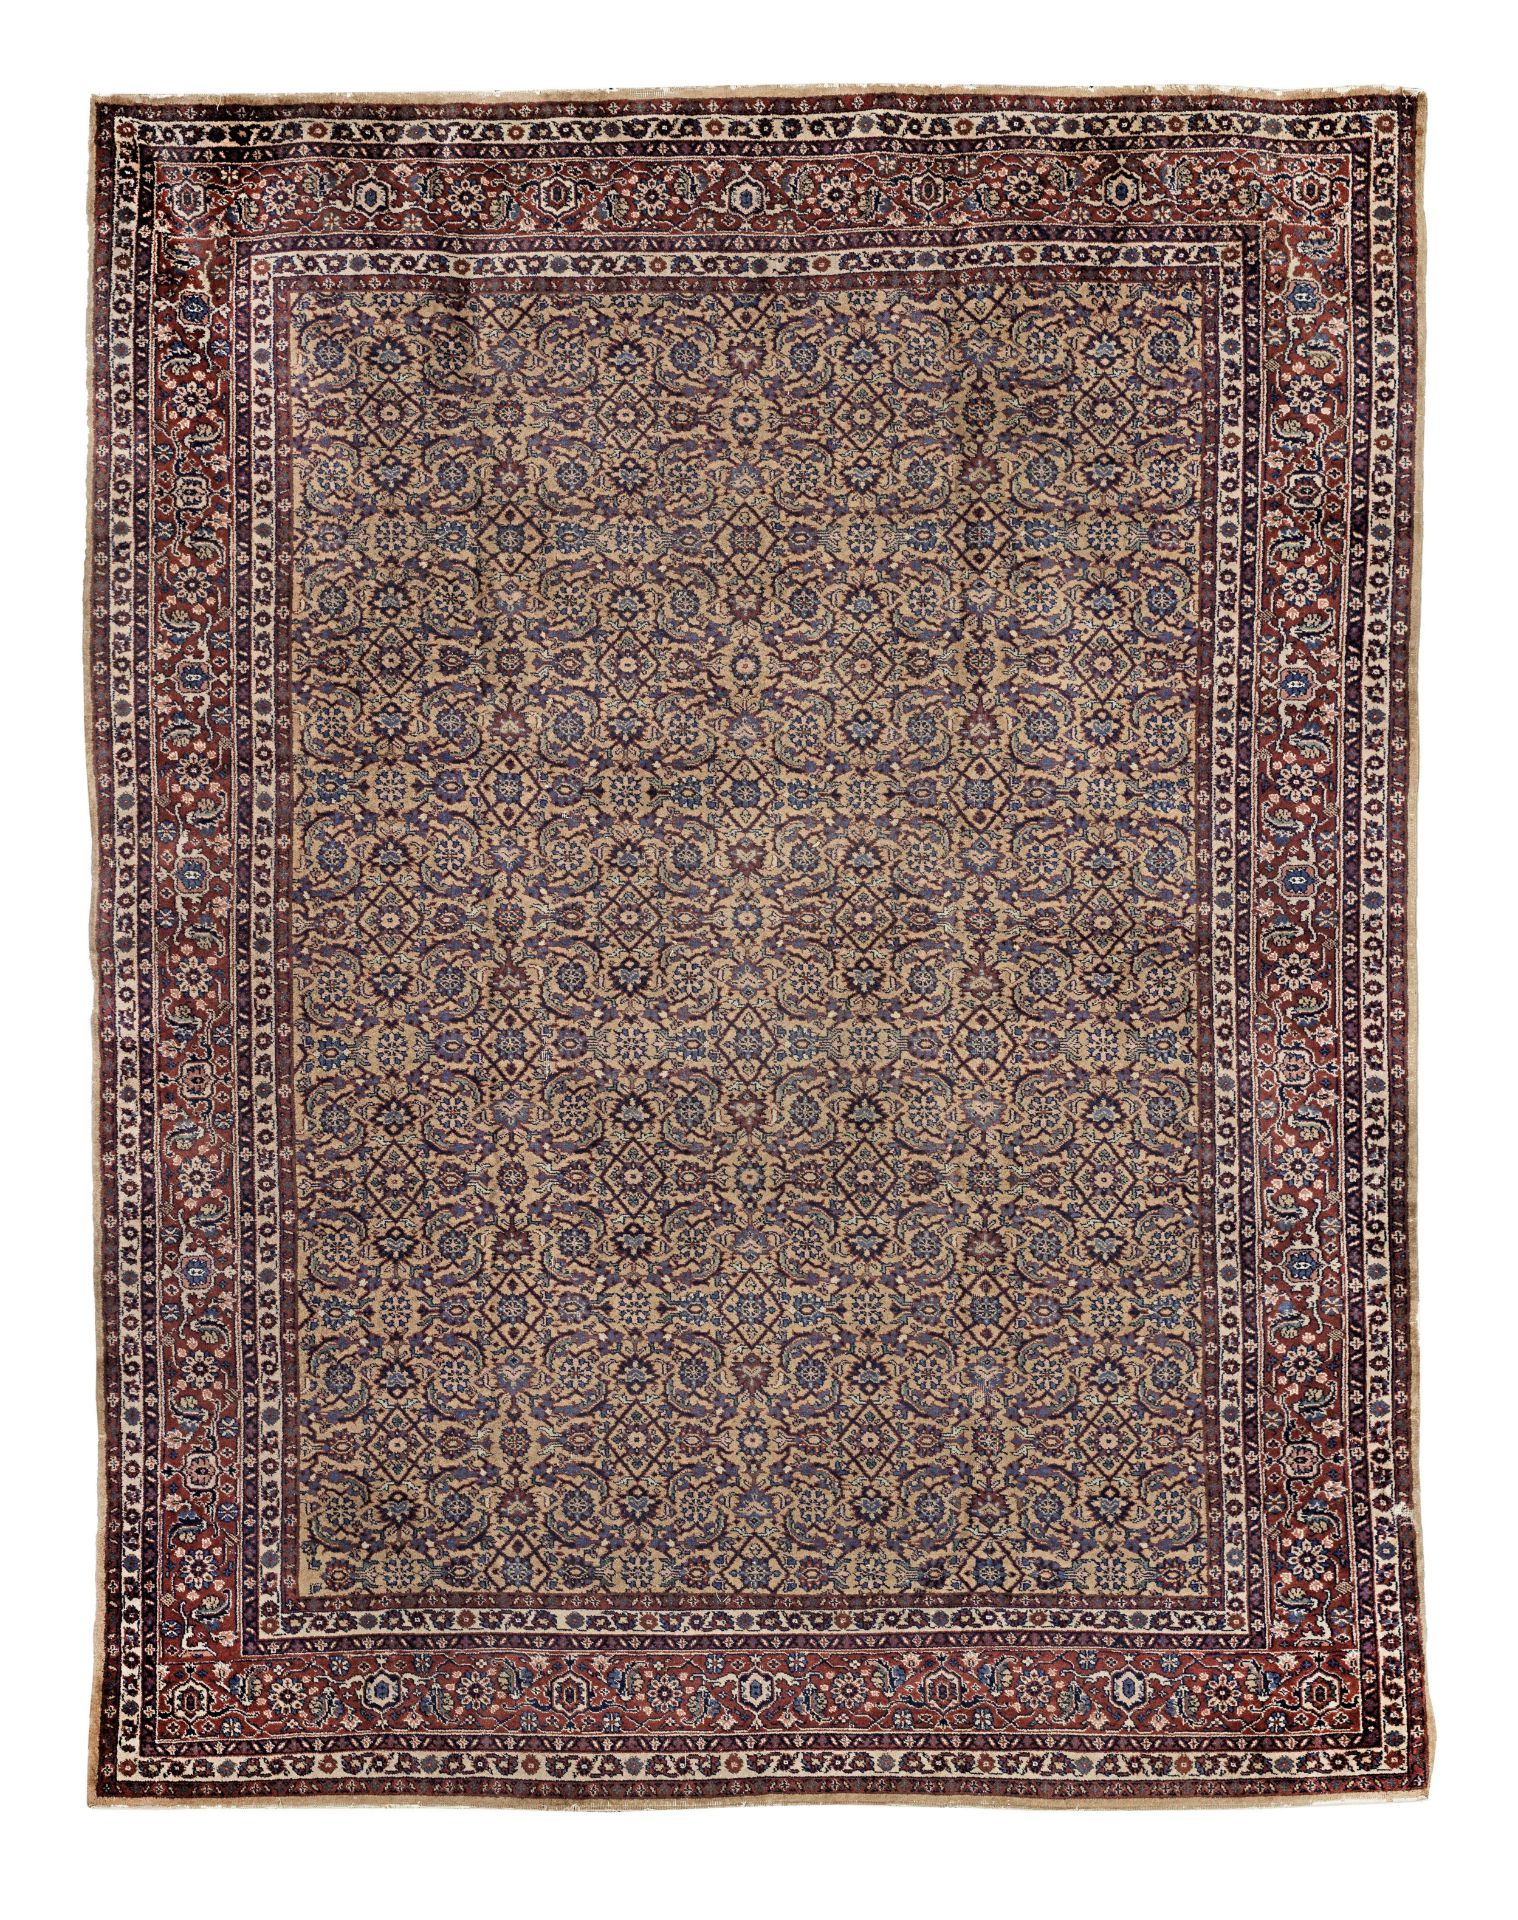 A Meshed carpet, North West Persia